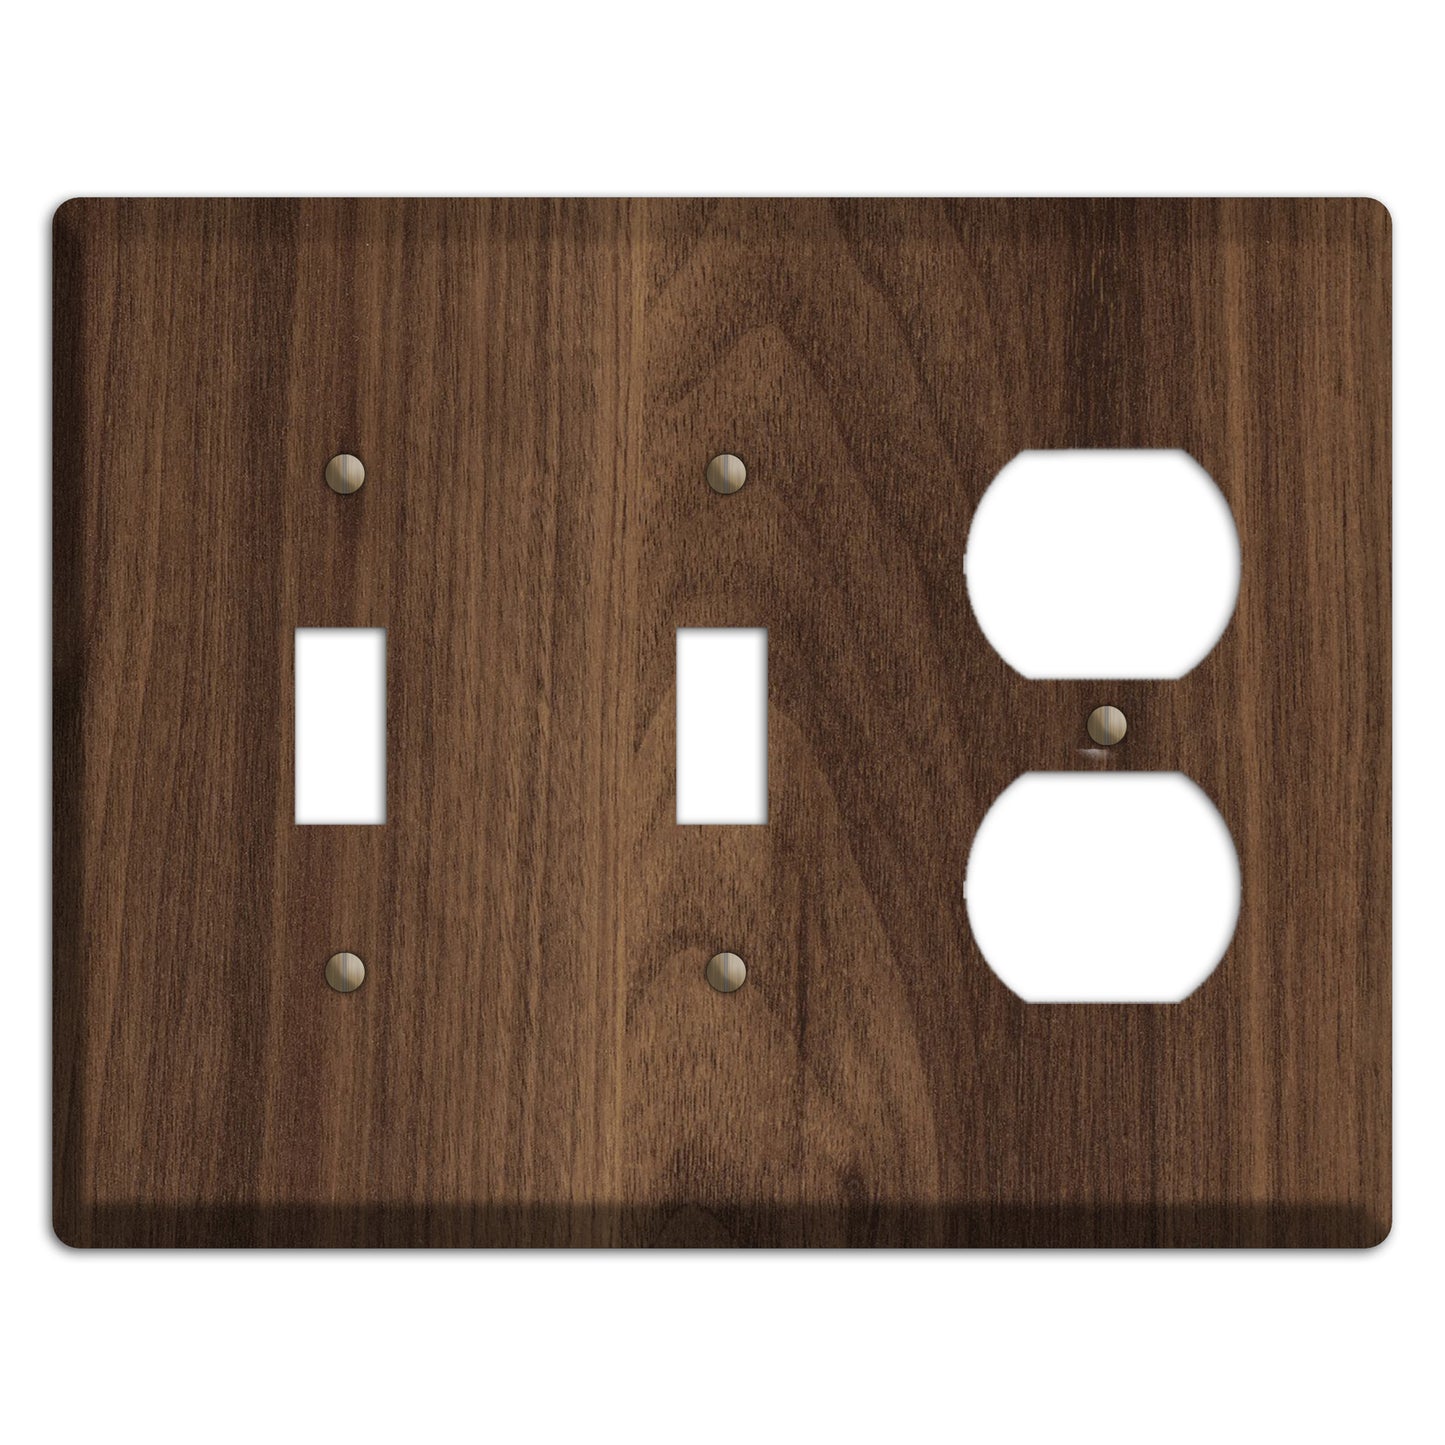 Unfinished Walnut Wood 2 Toggle / Duplex Outlet Cover Plate